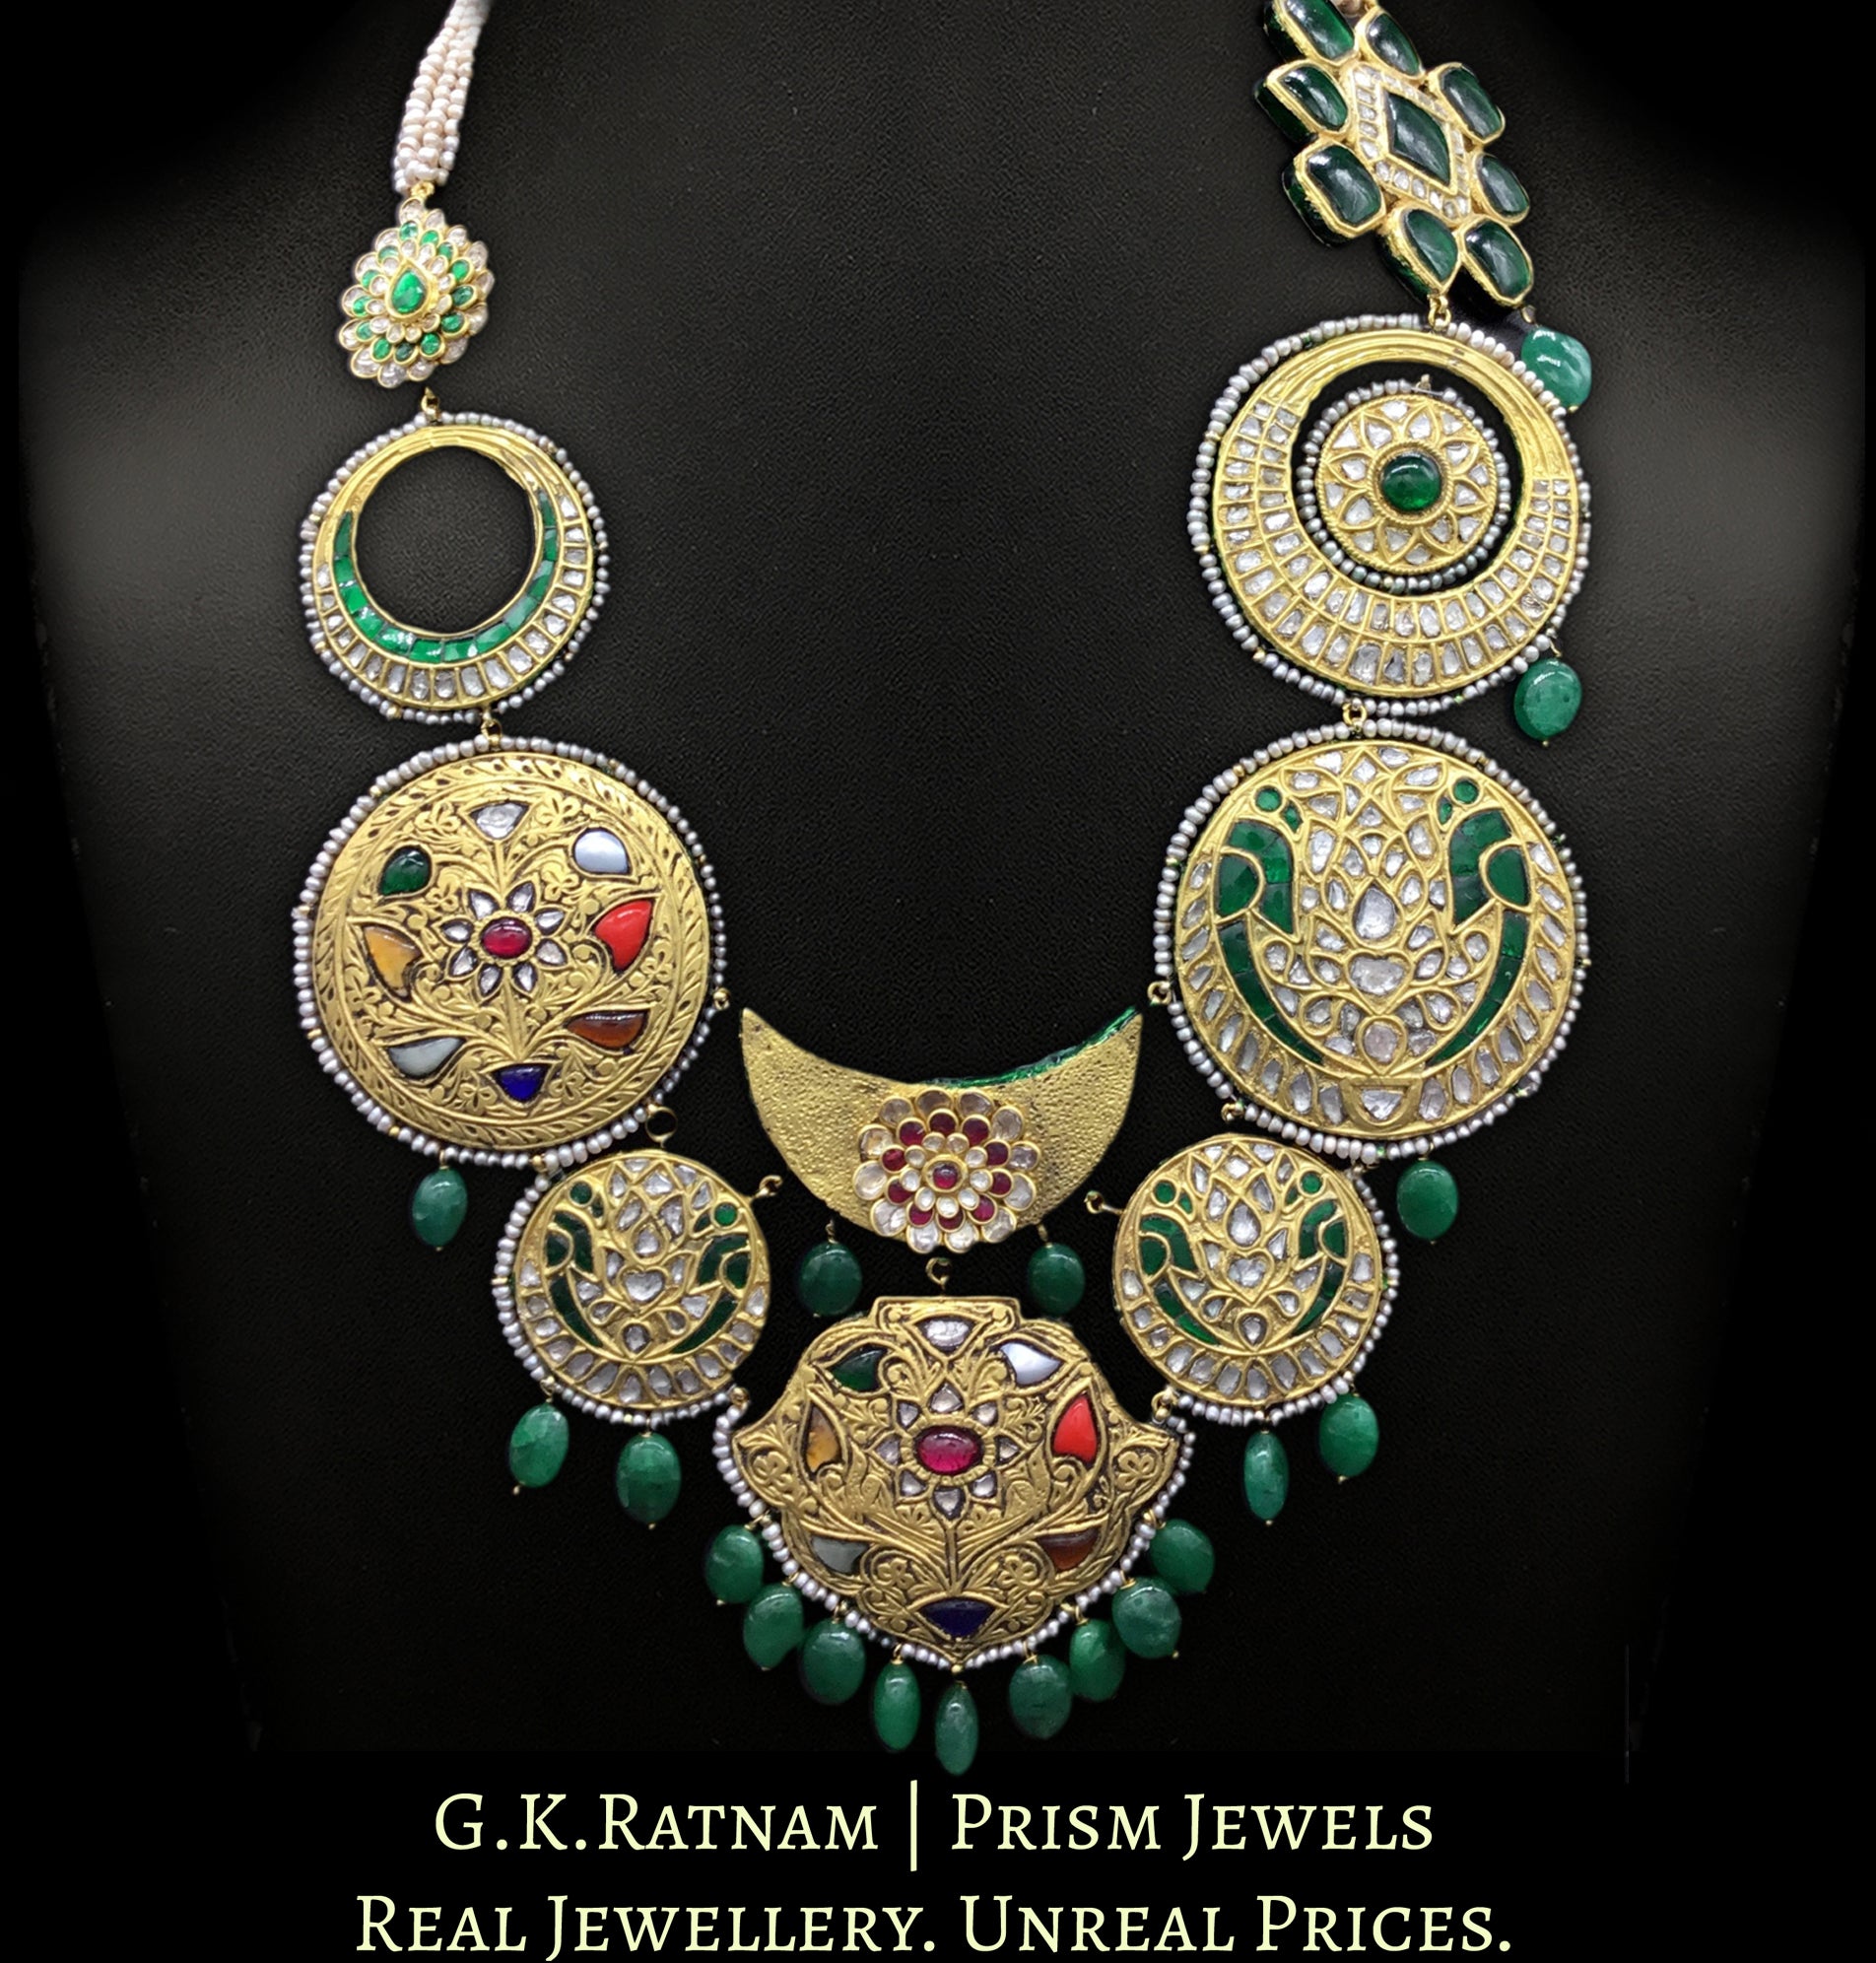 23k Gold and Diamond Polki hybrid Necklace with antiqued freshwater pearls and green beryls - G. K. Ratnam